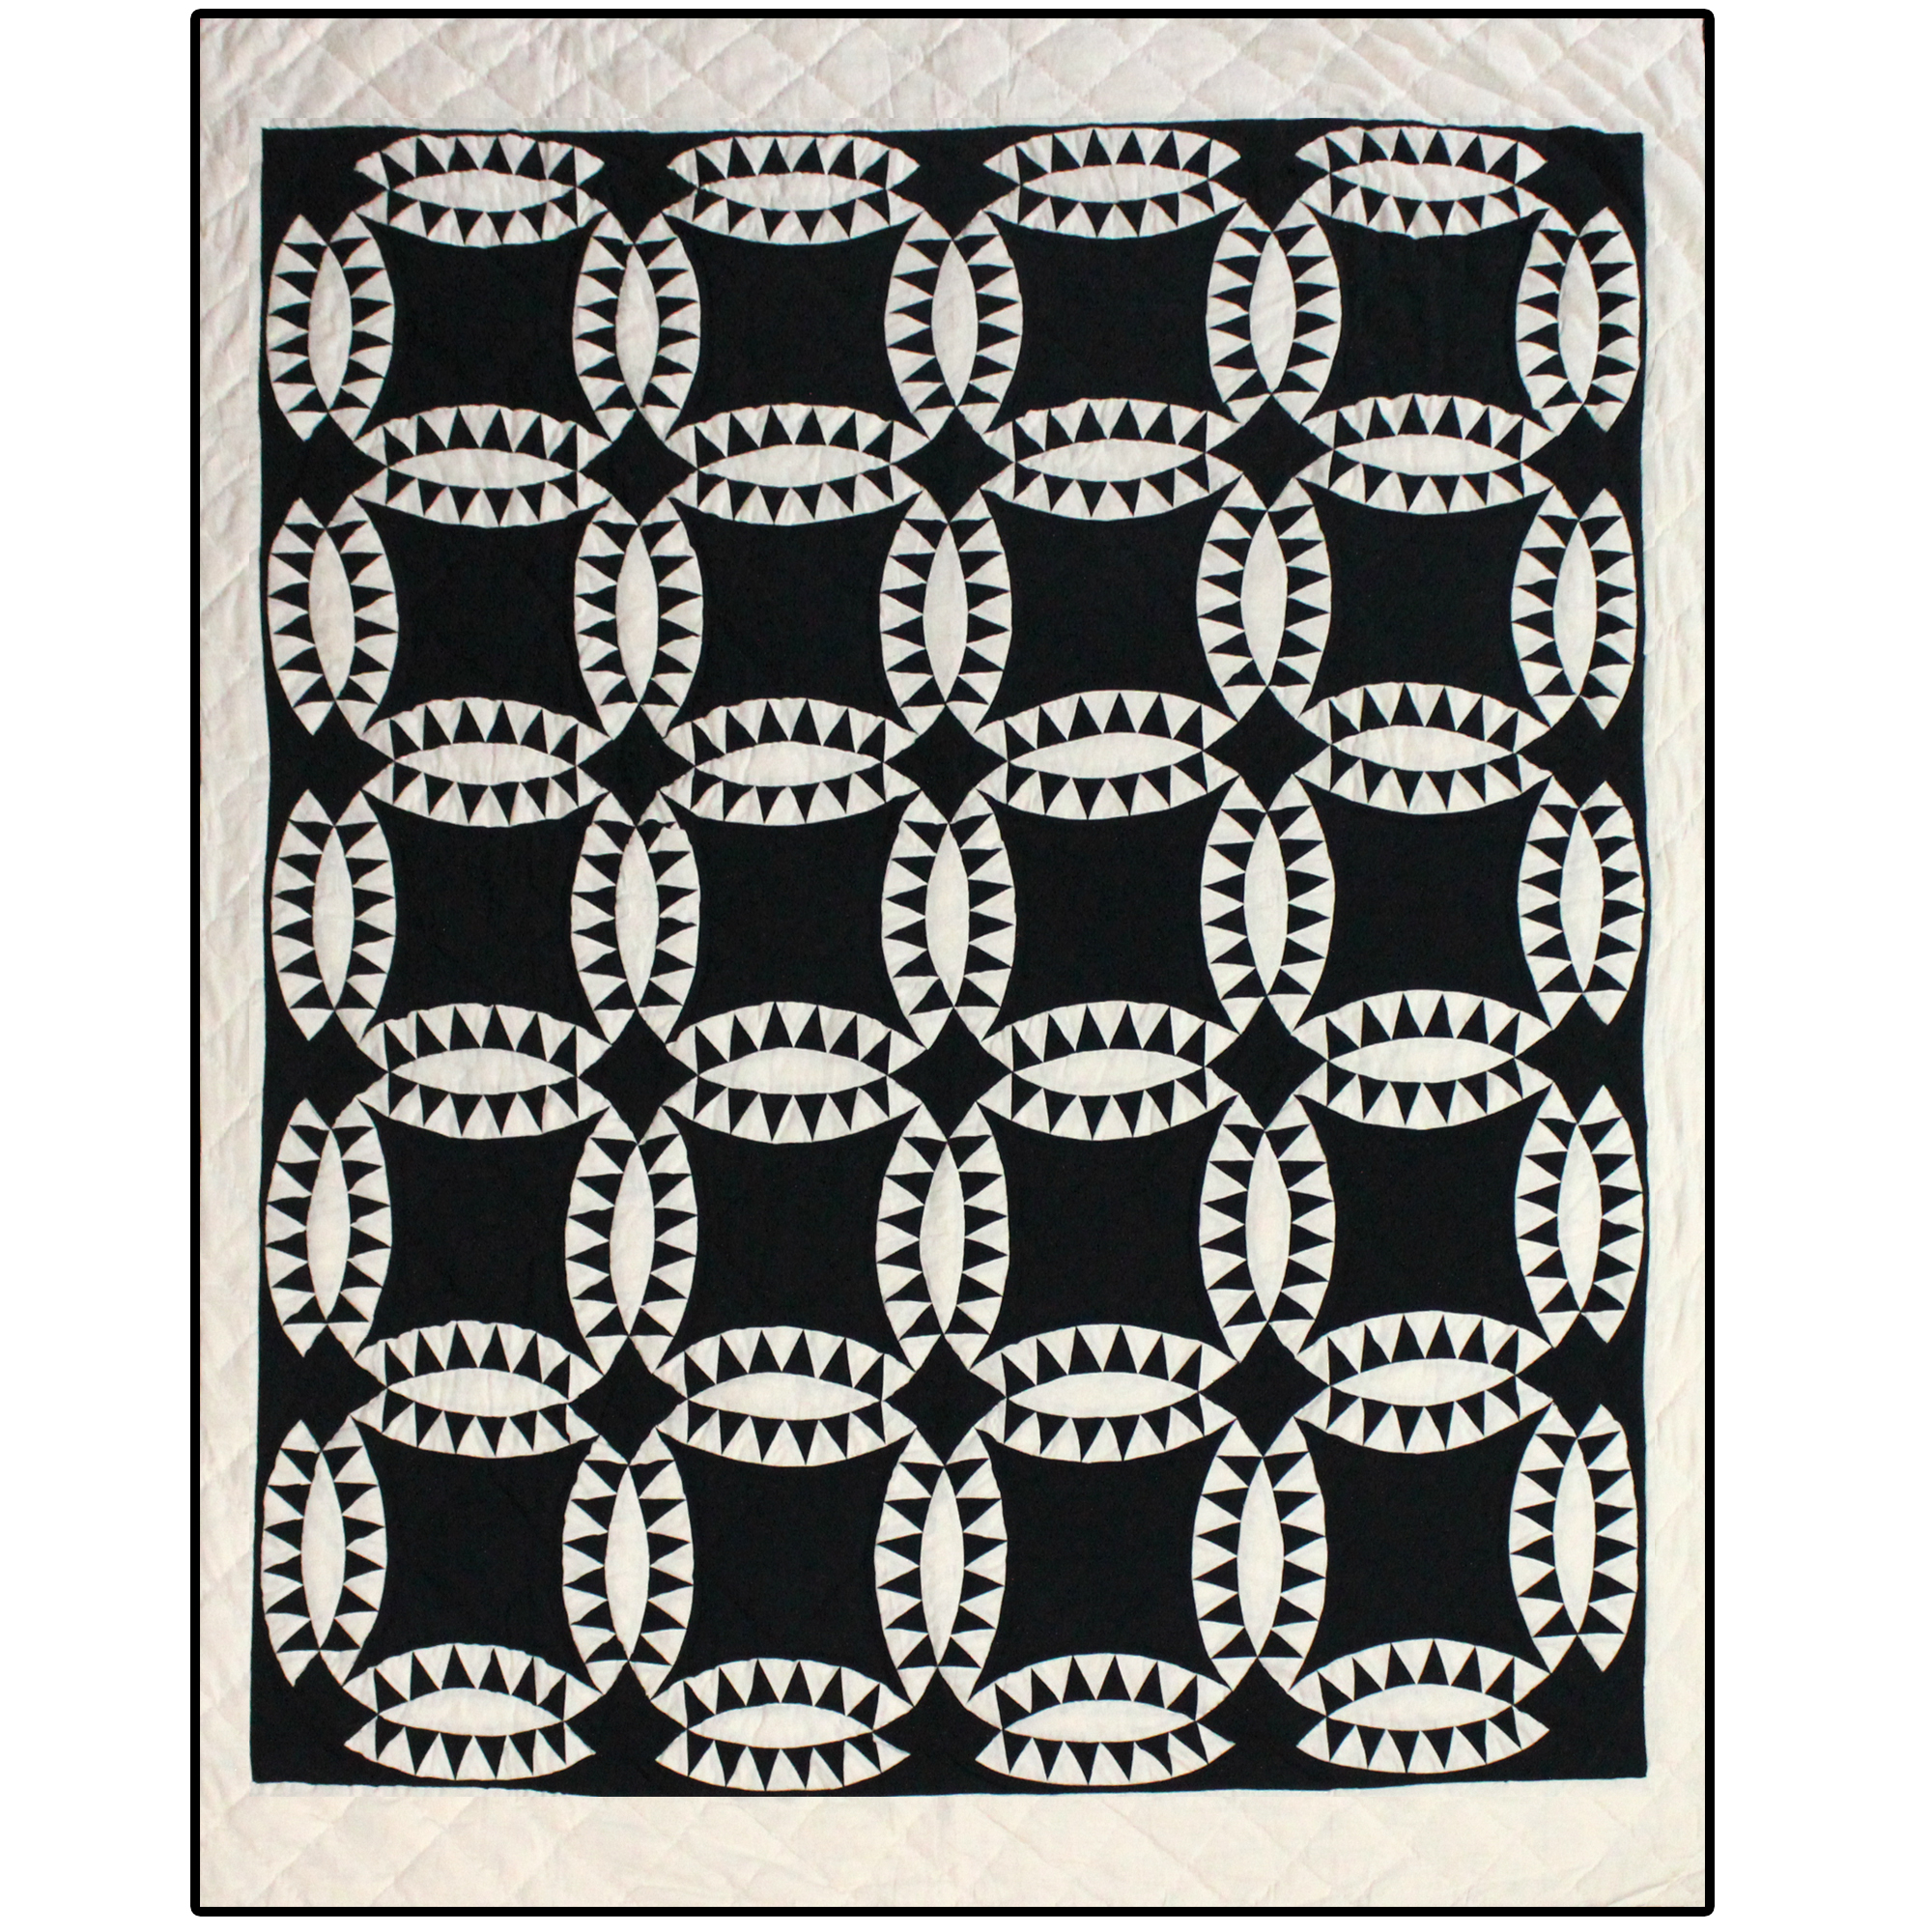 Black and WhiteWedding Ring Super Queen Quilt 92"W x 96"L